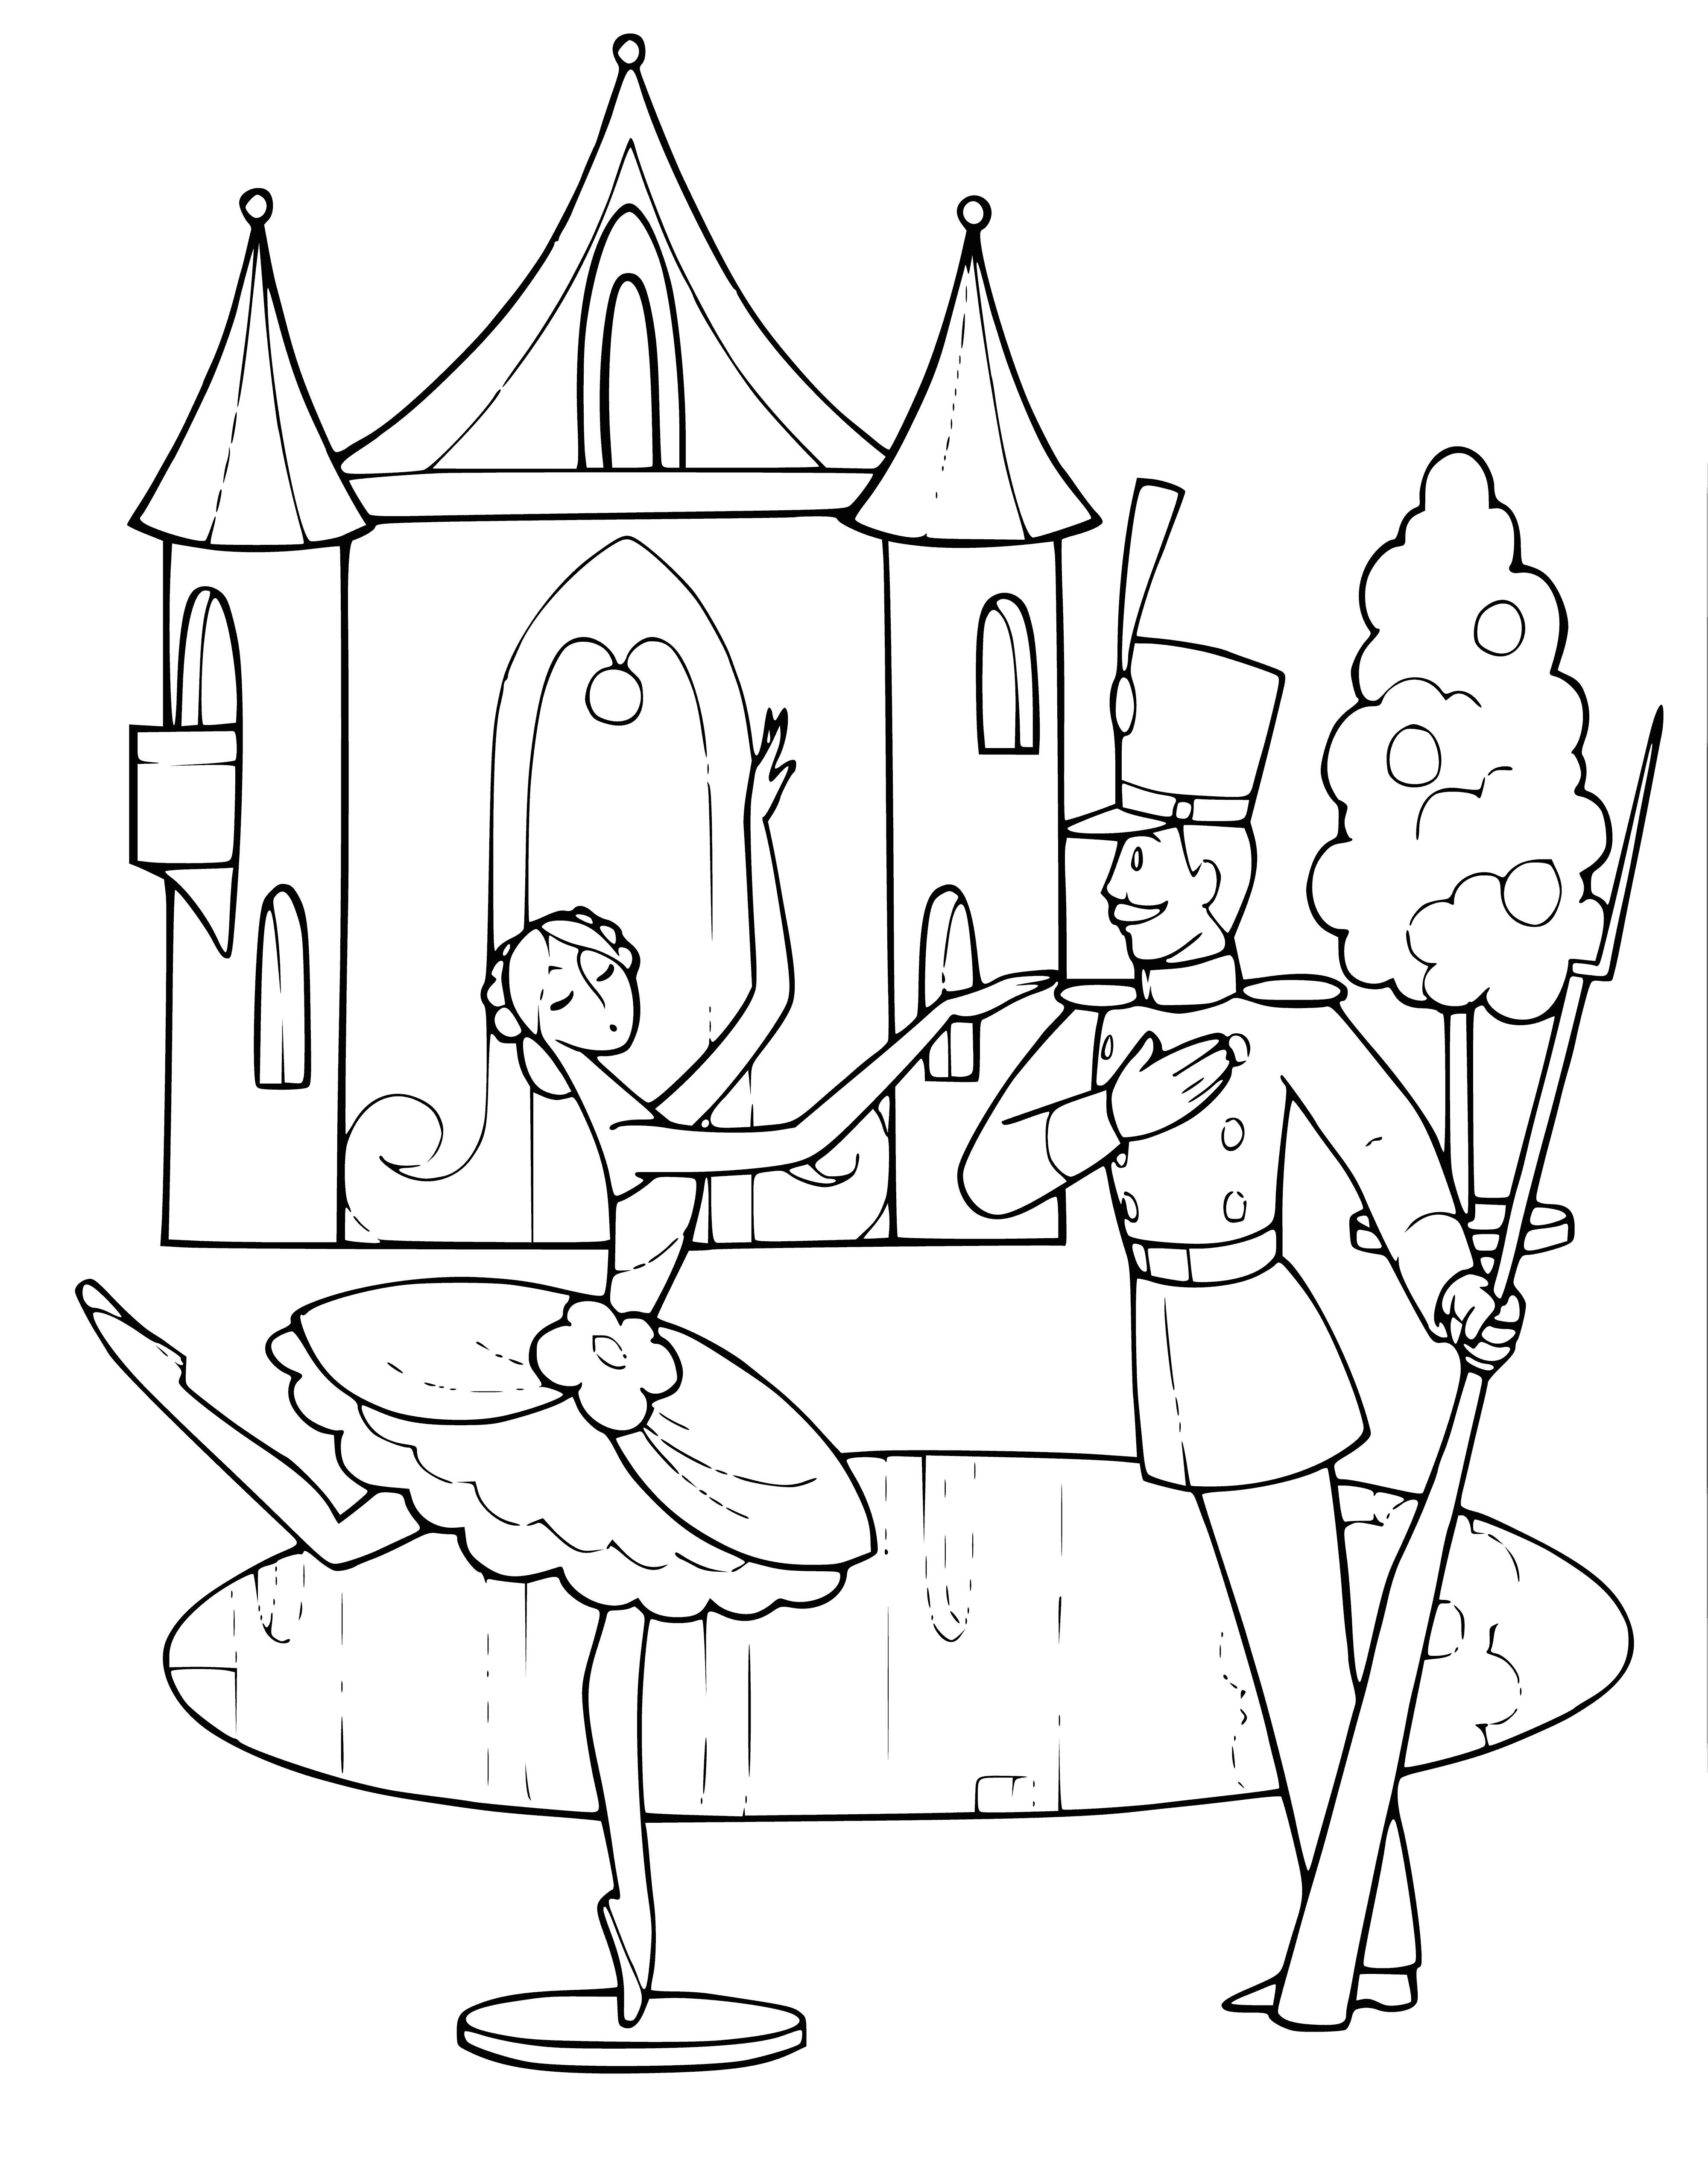 coloring page: Man in military uniform w/ straw hat, blue scarf, & yellow flower. Dancer w/ white scarf & black hat with woman in white dress playing violin in bg.